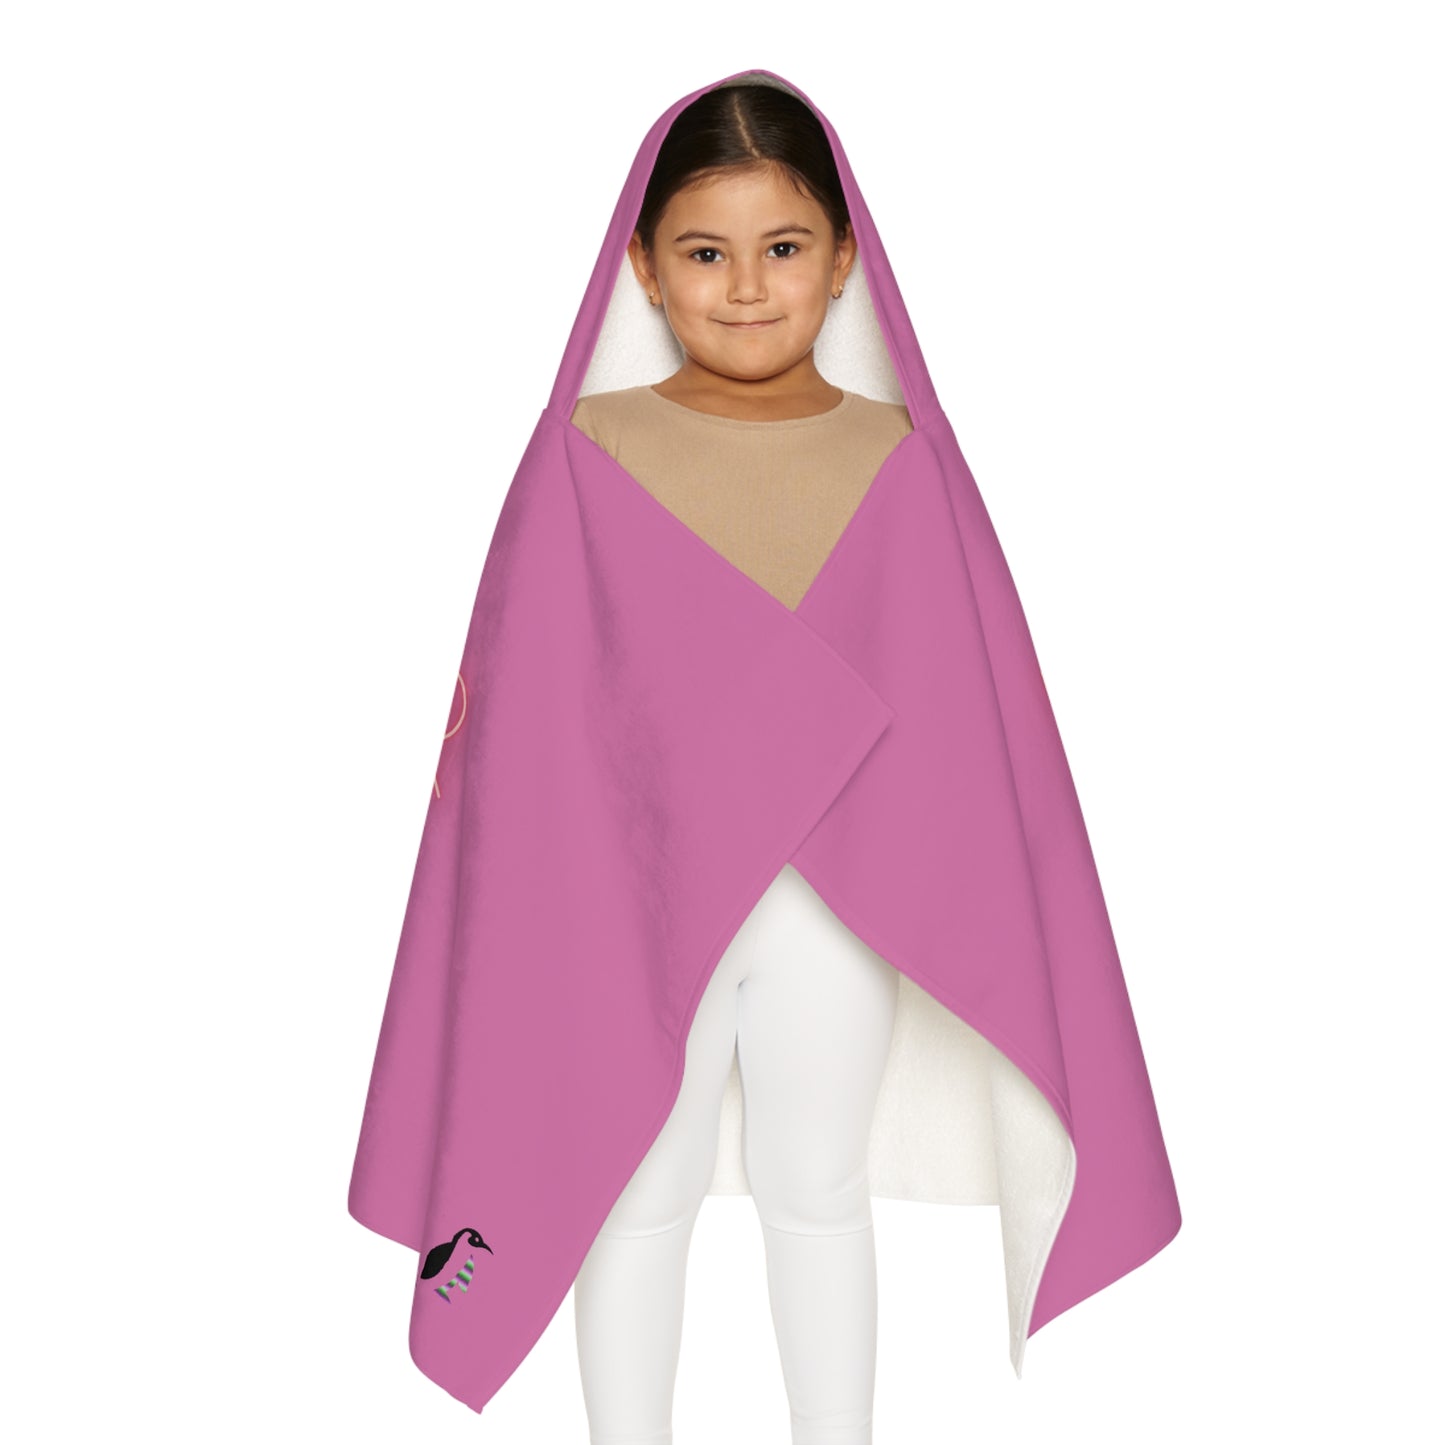 Youth Hooded Towel: Lost Remember Honor Lite Pink